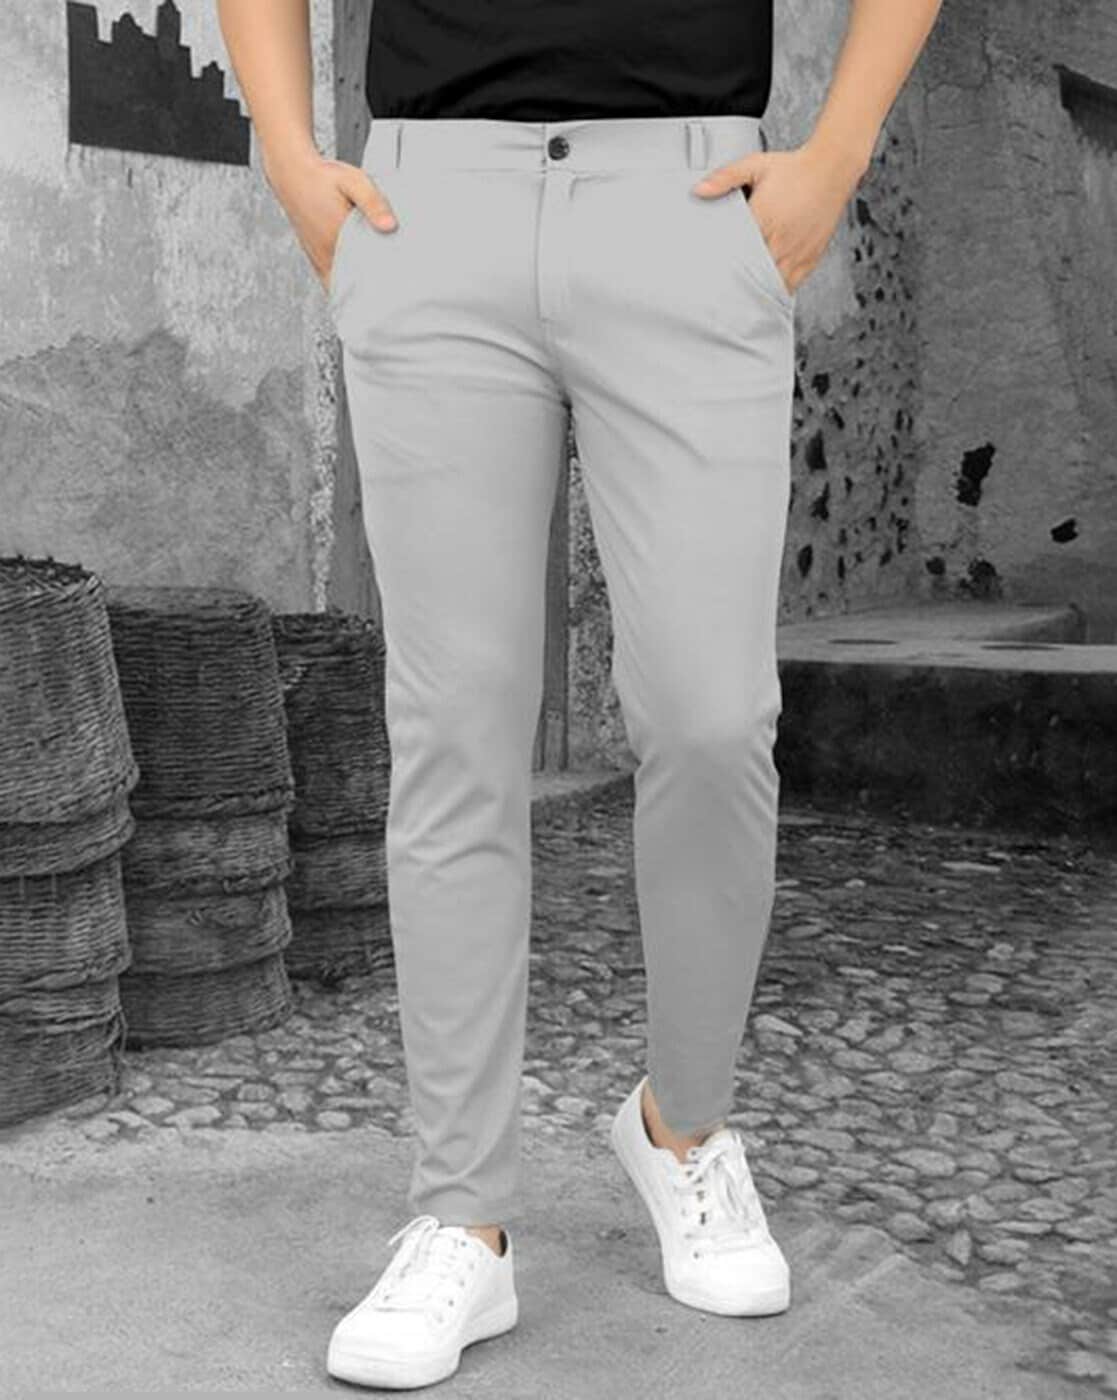 Buy SKYBLUE Trousers & Pants for Men by Haul Chic Online | Ajio.com